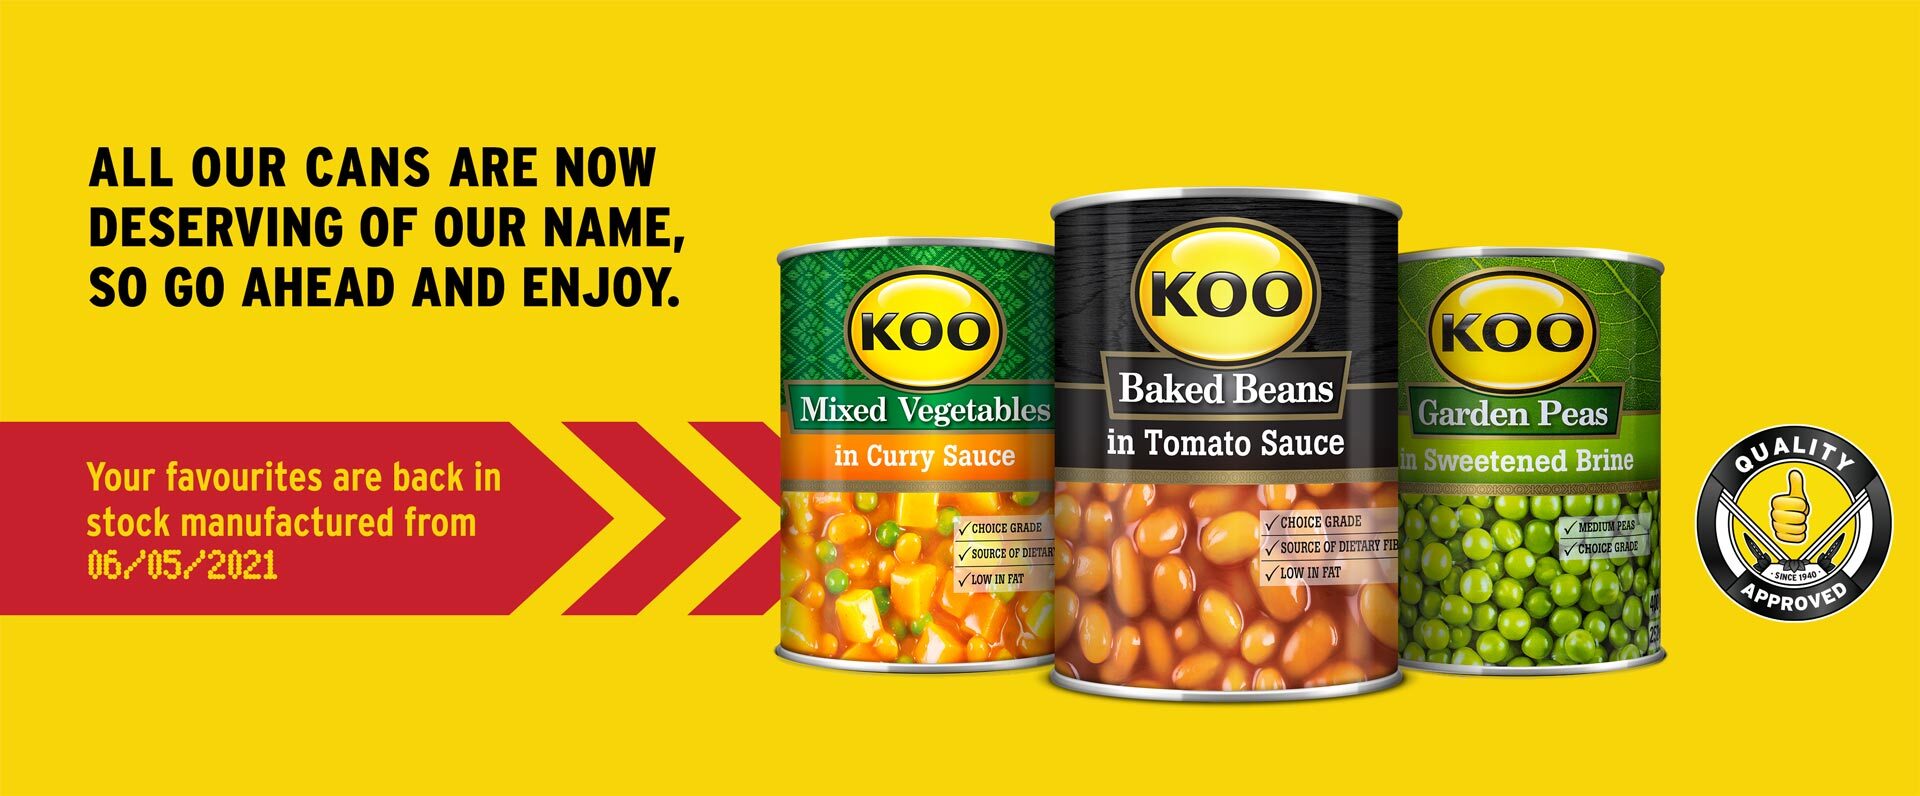 Display of KOO cans that were manufactured from the 6th of May 2021 and are back in stock - Mixed Vegetables in Curry Sauce, Baked Beans in Tomato Sauce and Garden Peas in Sweetened Brine. 